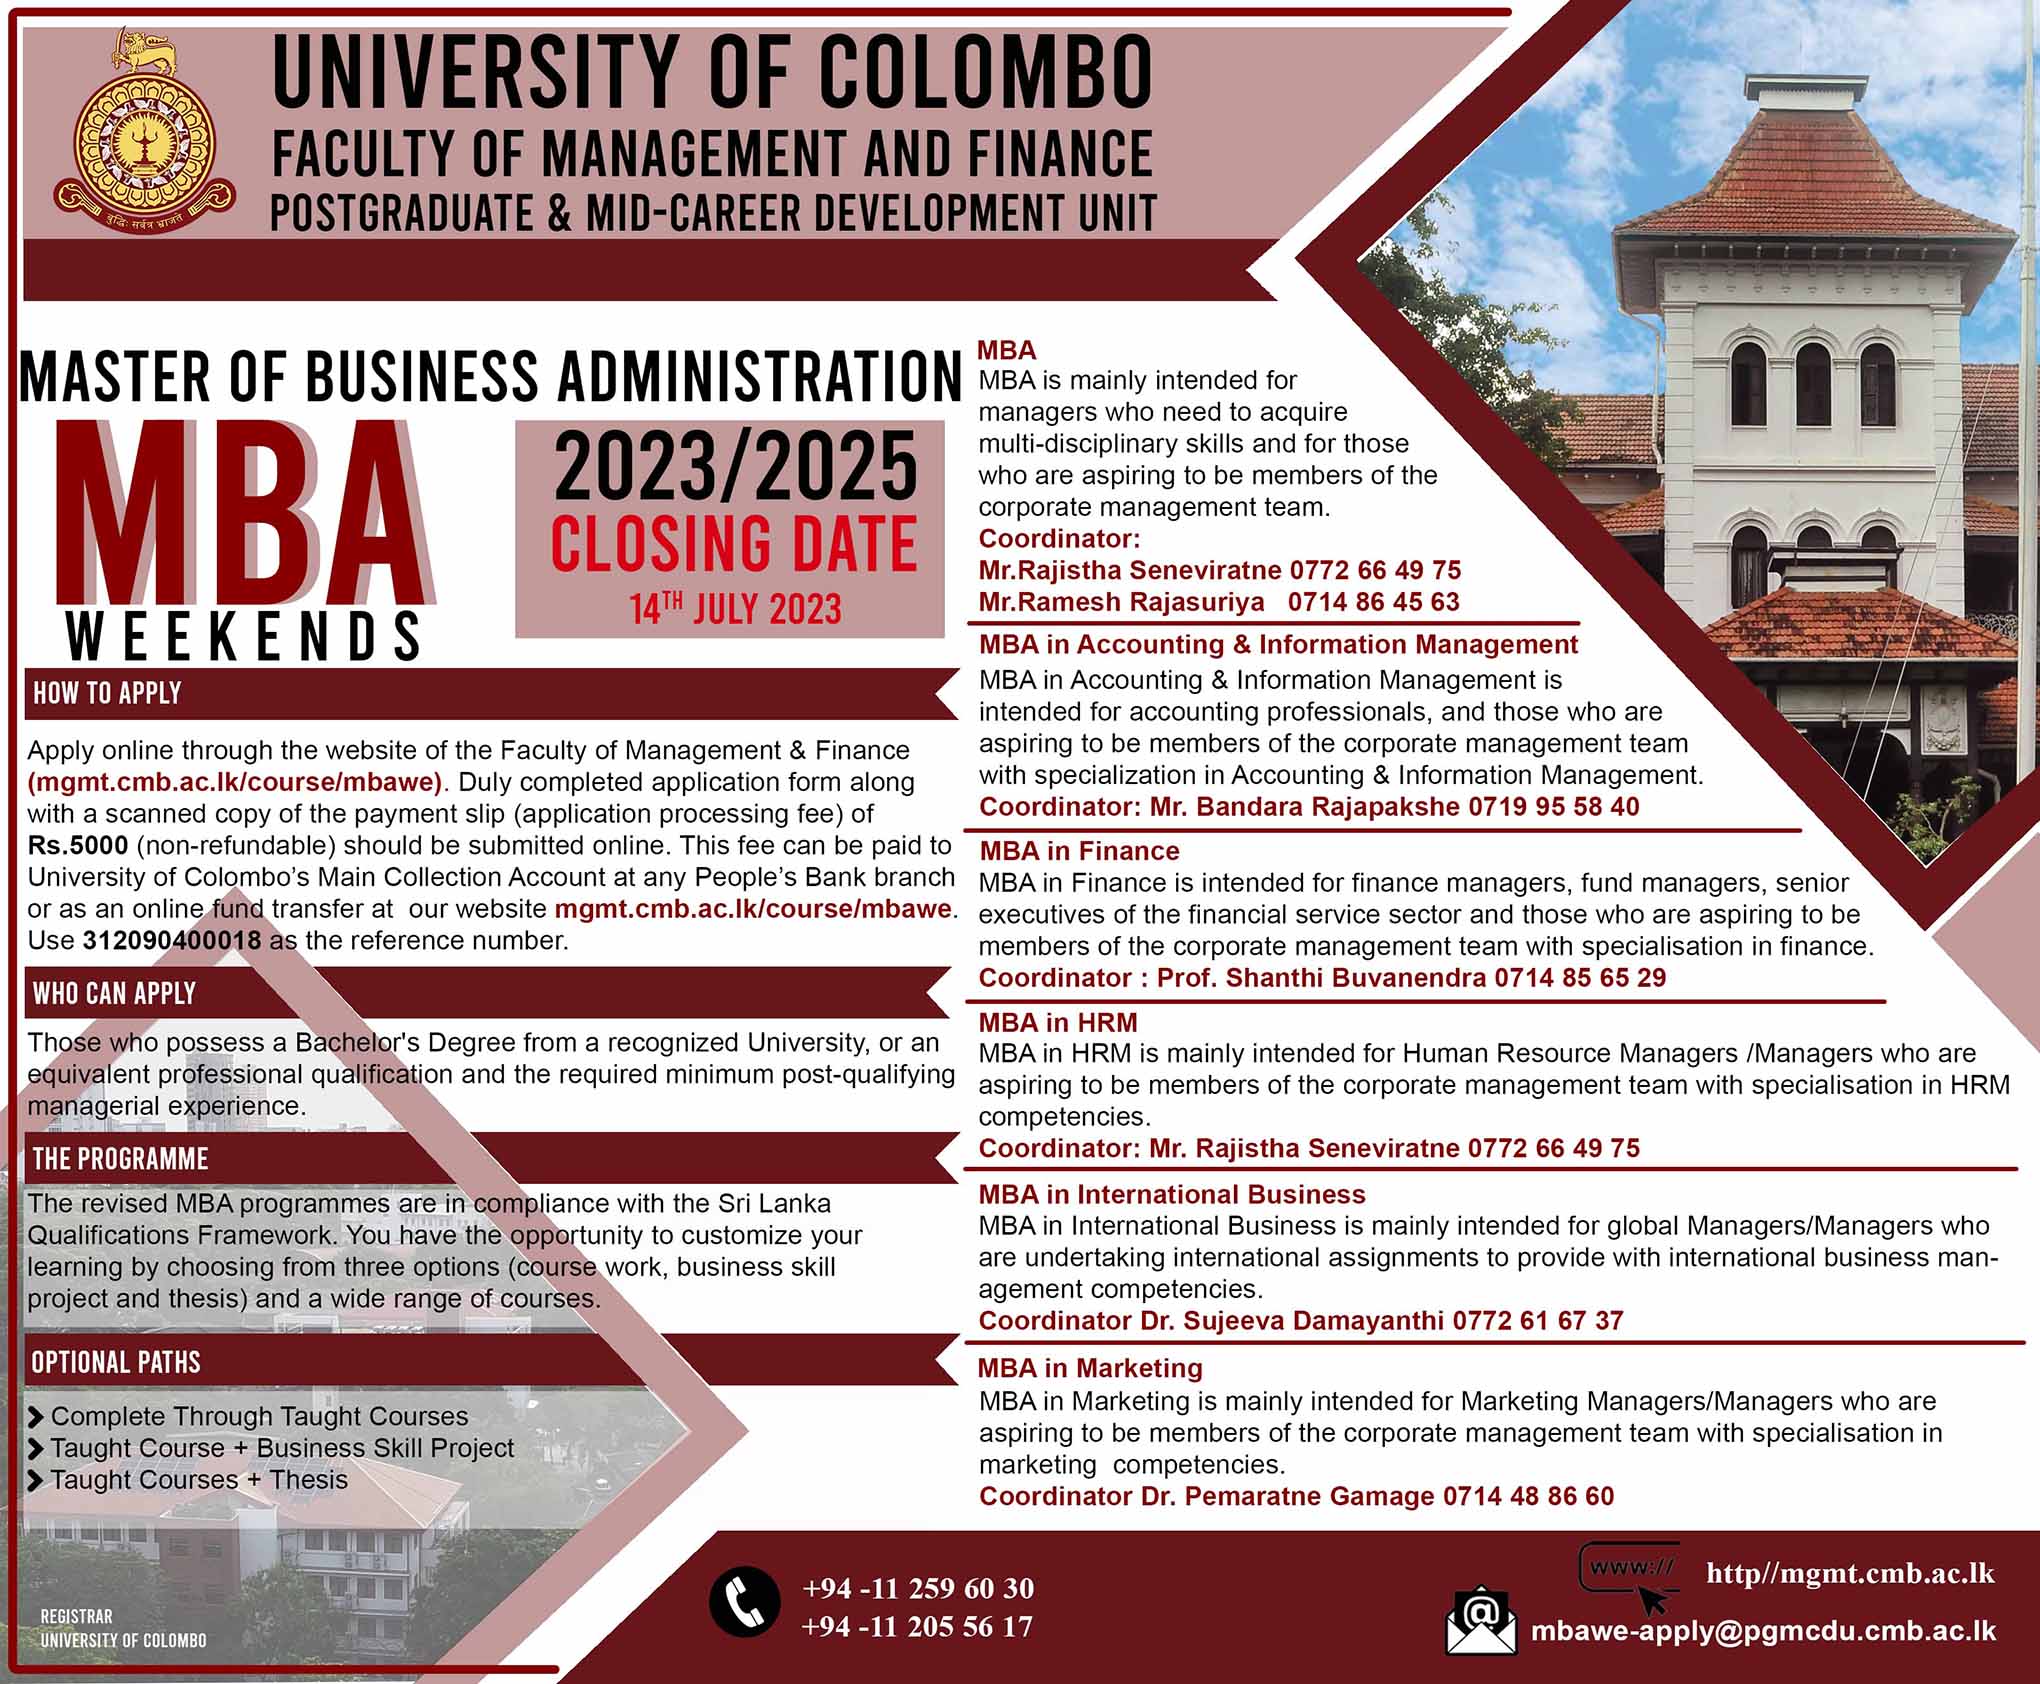 Master of Business Administration (MBA) Weekends Programme (2023) - University of Colombo